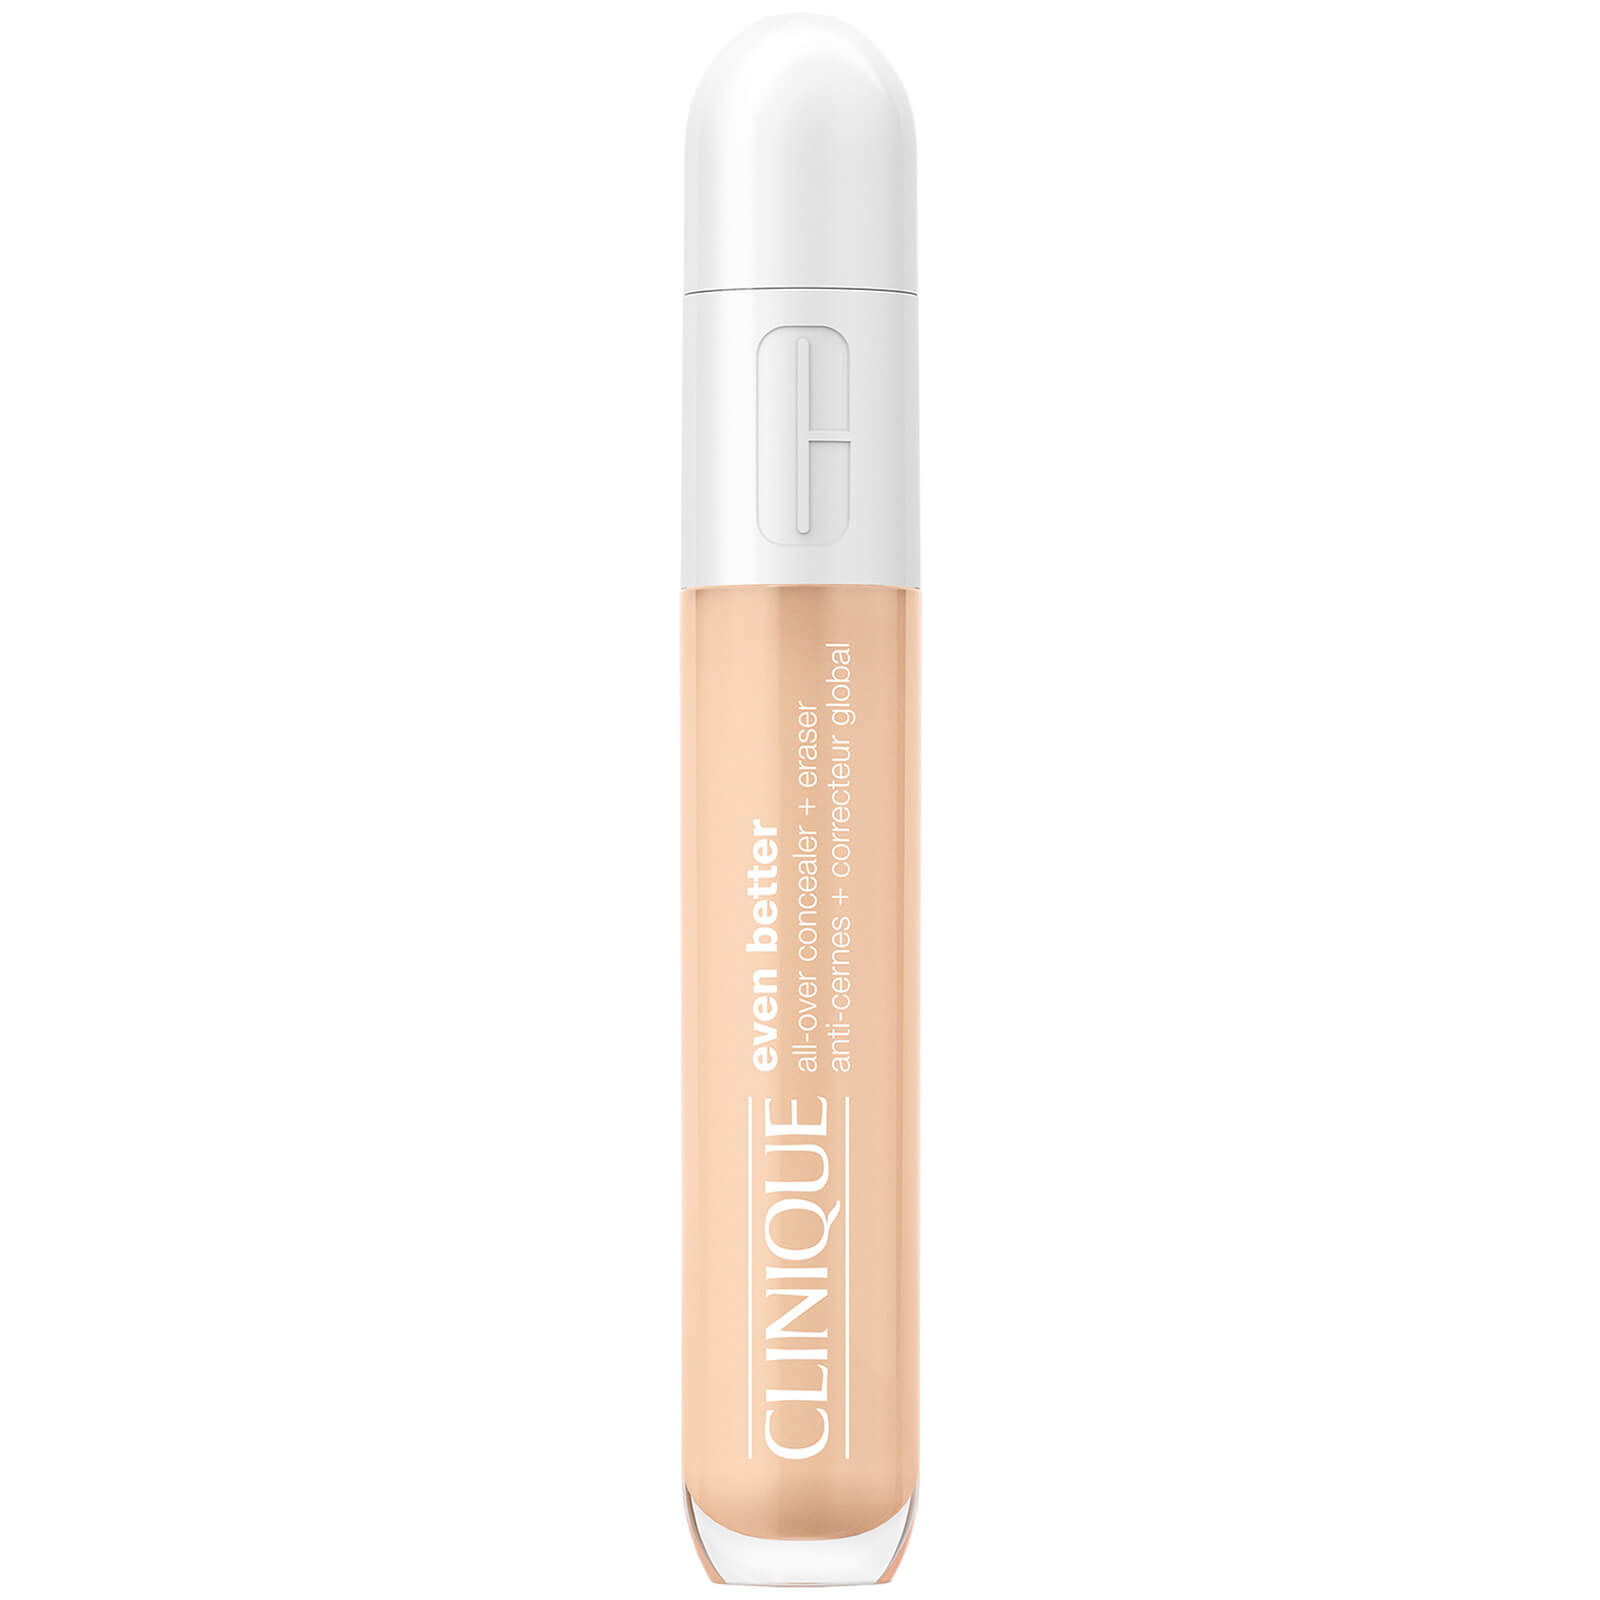 Clinique Even Better All-Over Concealer and Eraser 6ml (Various Shades) - CN 20 Fair